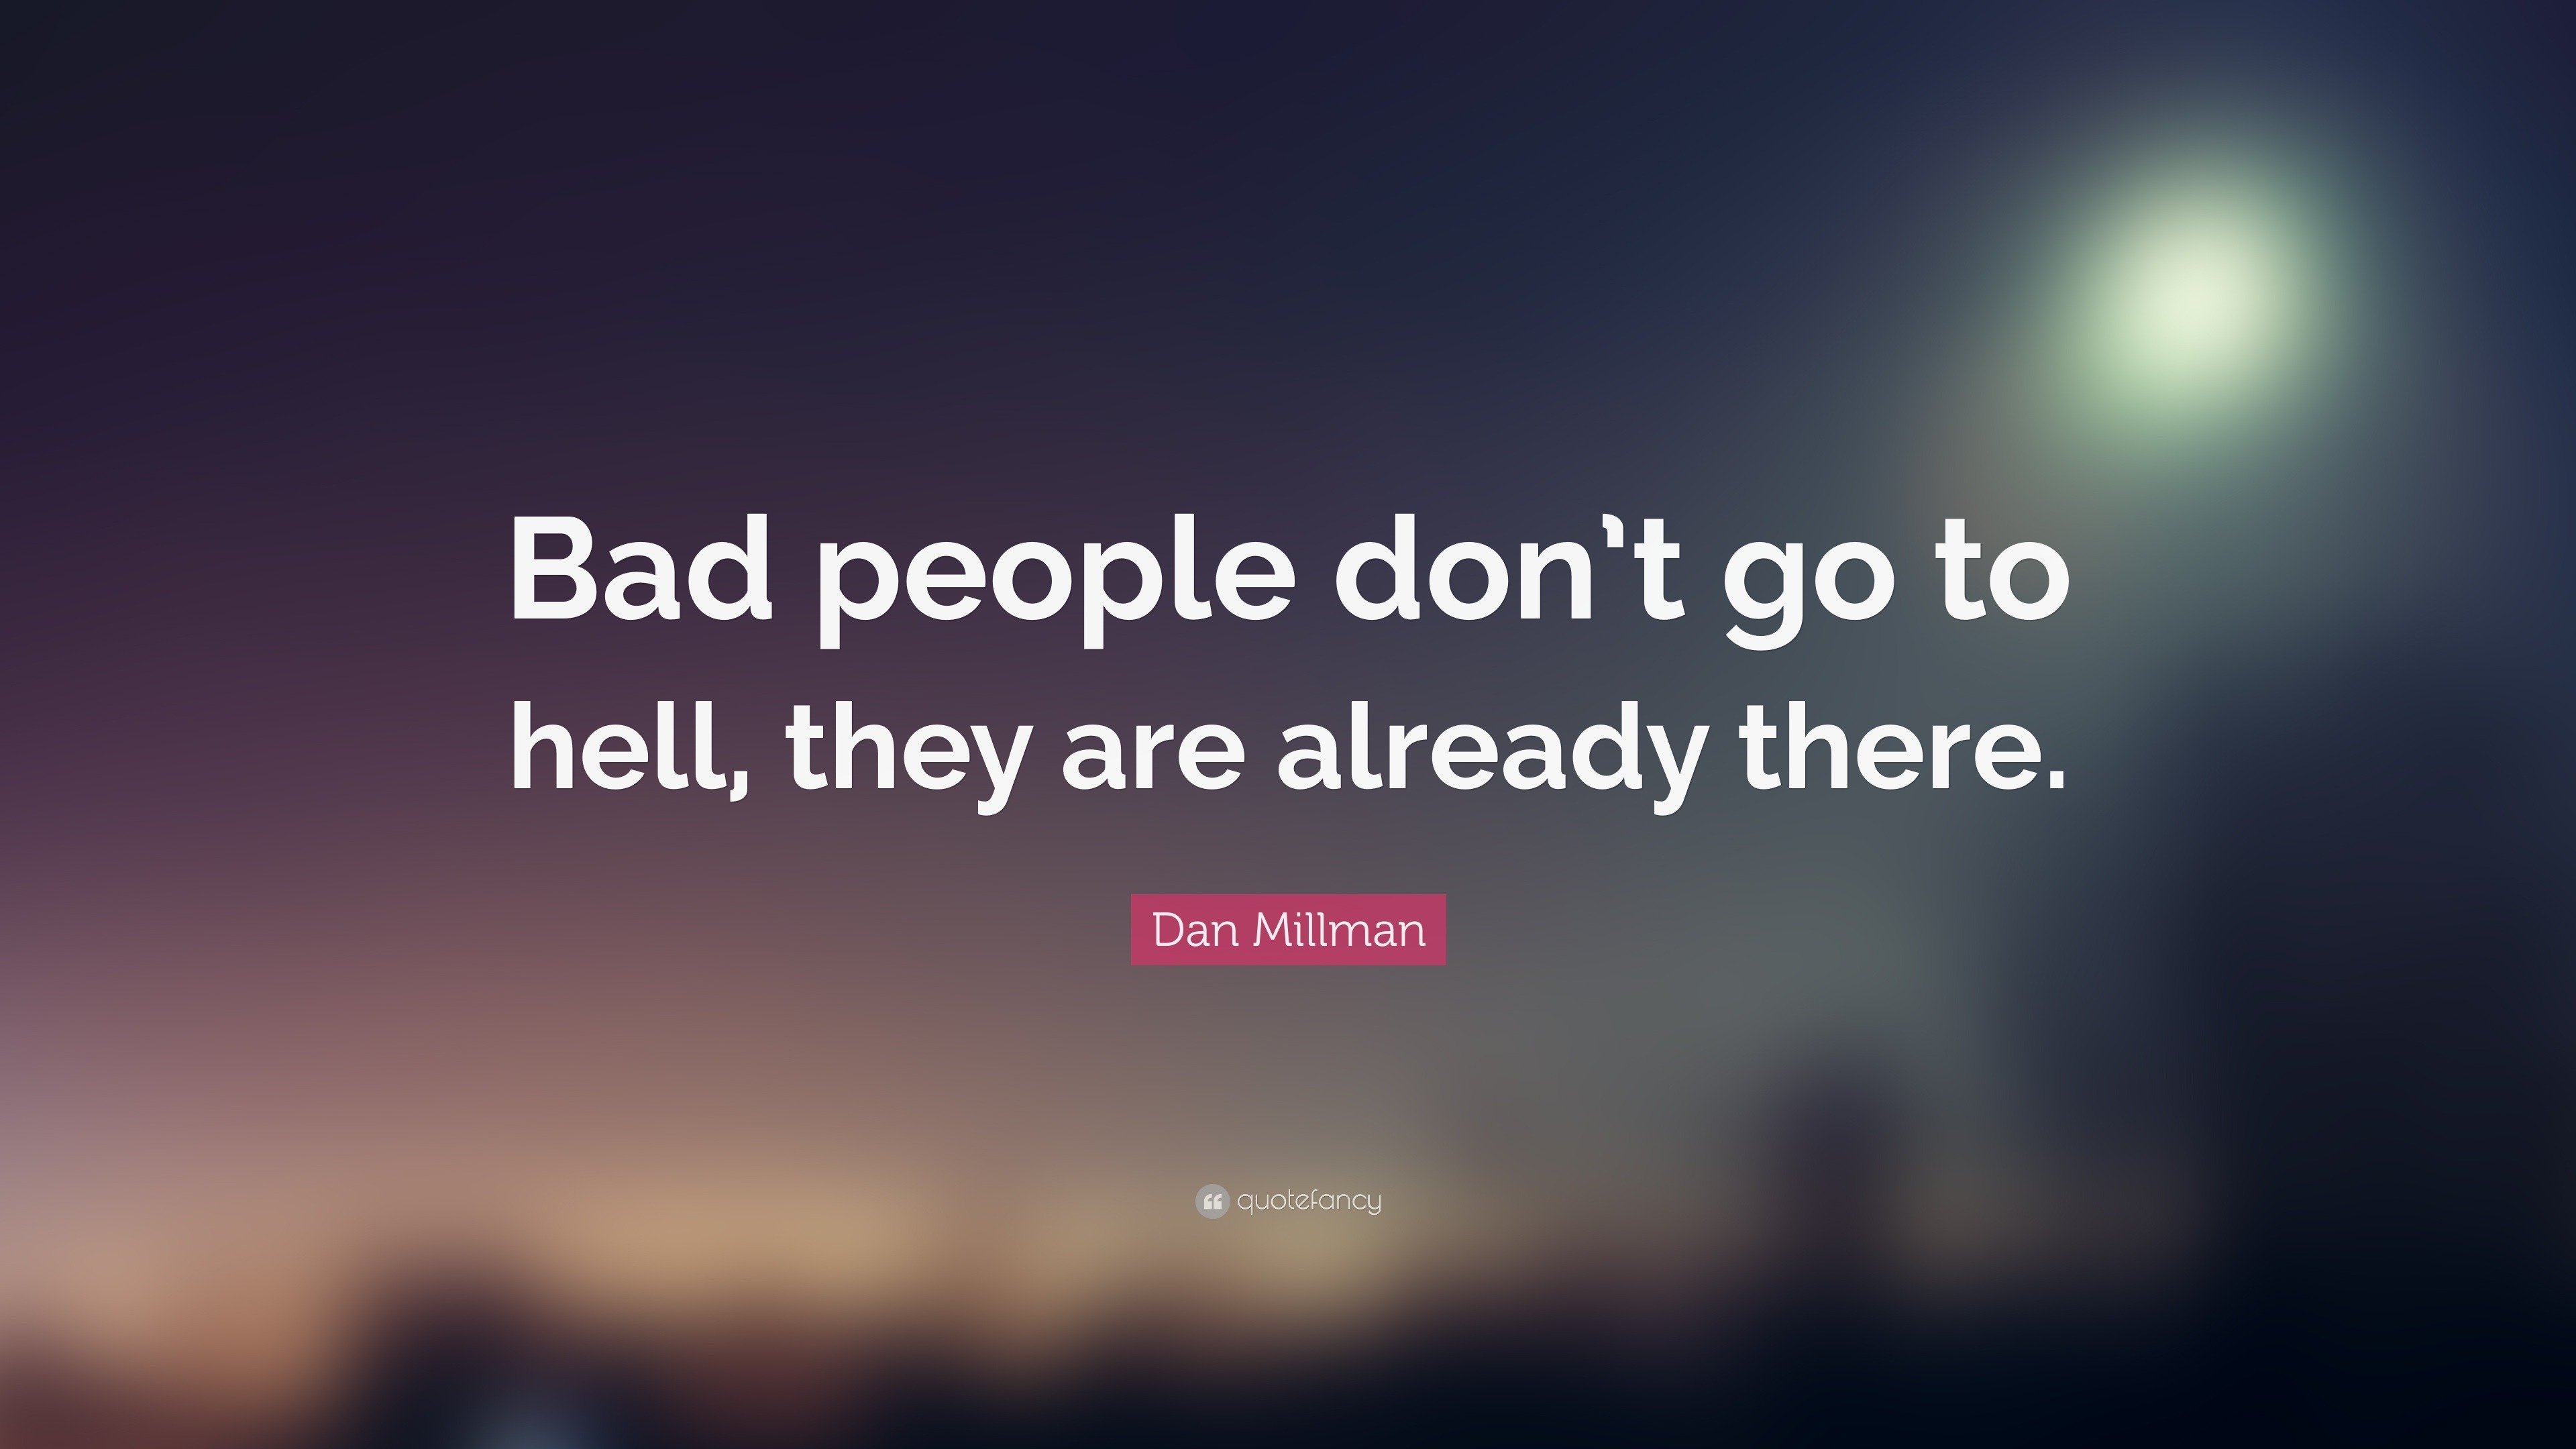 Dan Millman Quote: “Bad people don't go to hell, they are already